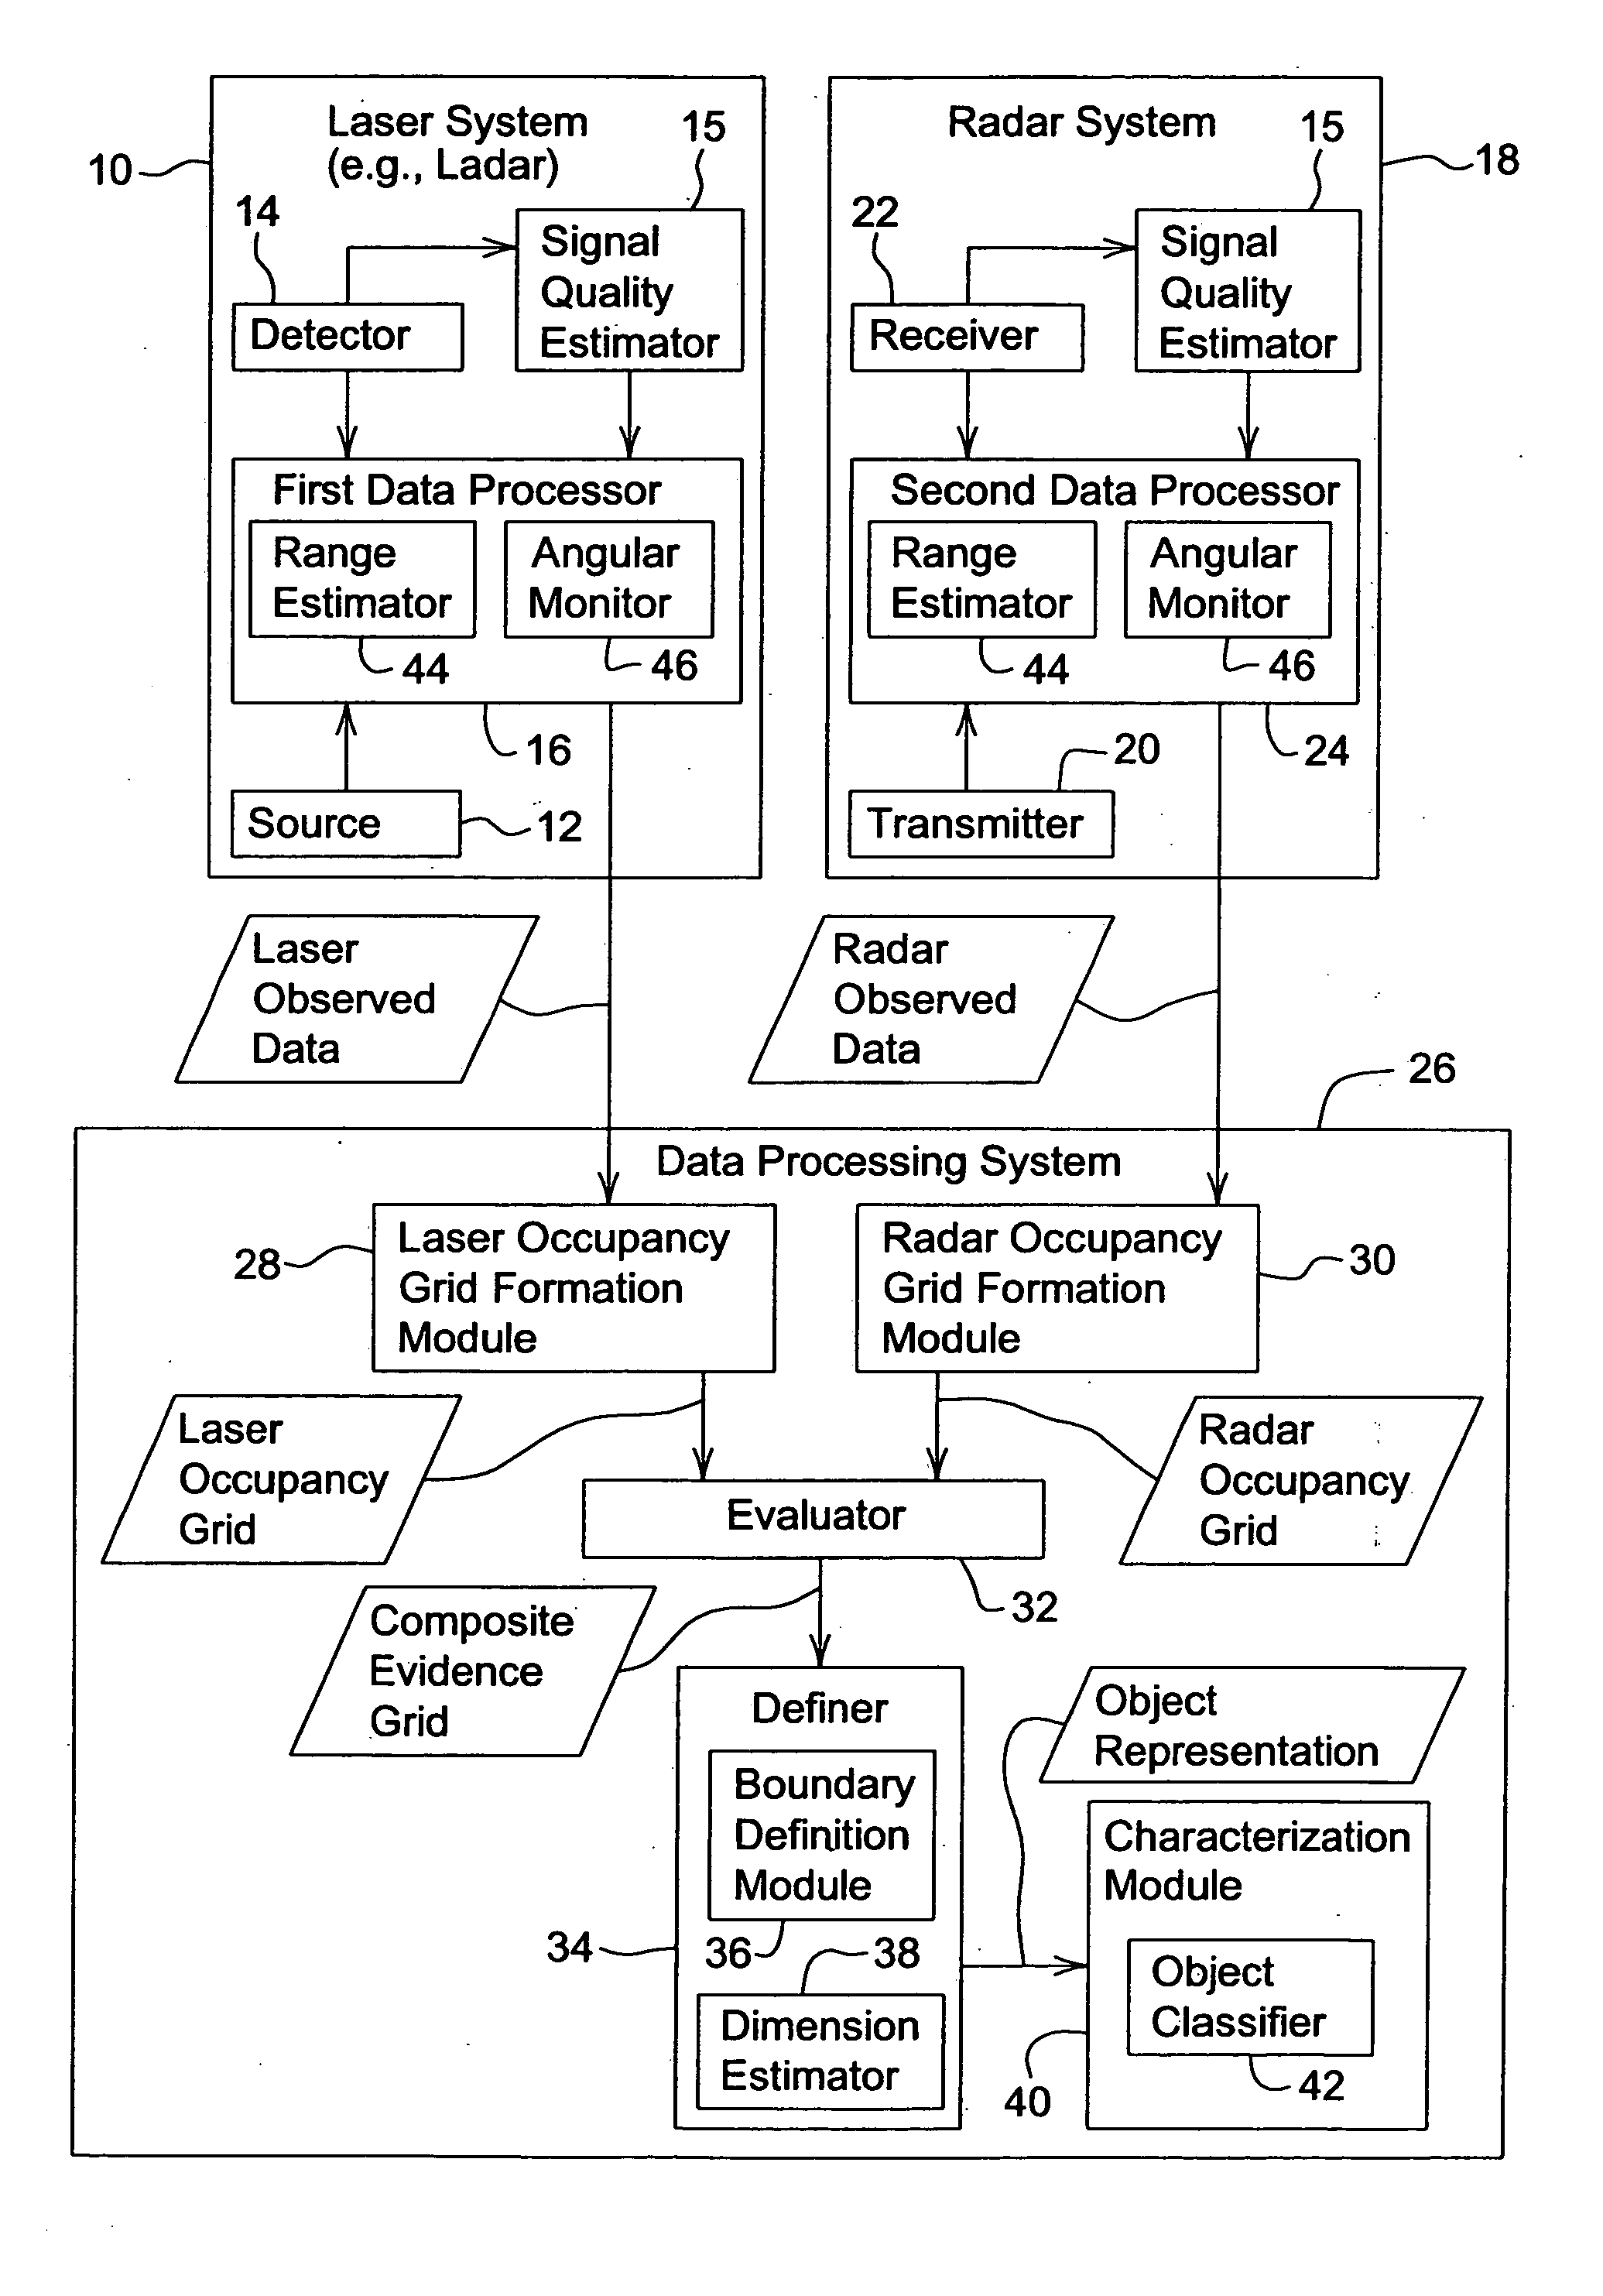 Method and system for detecting an object using a composite evidence grid